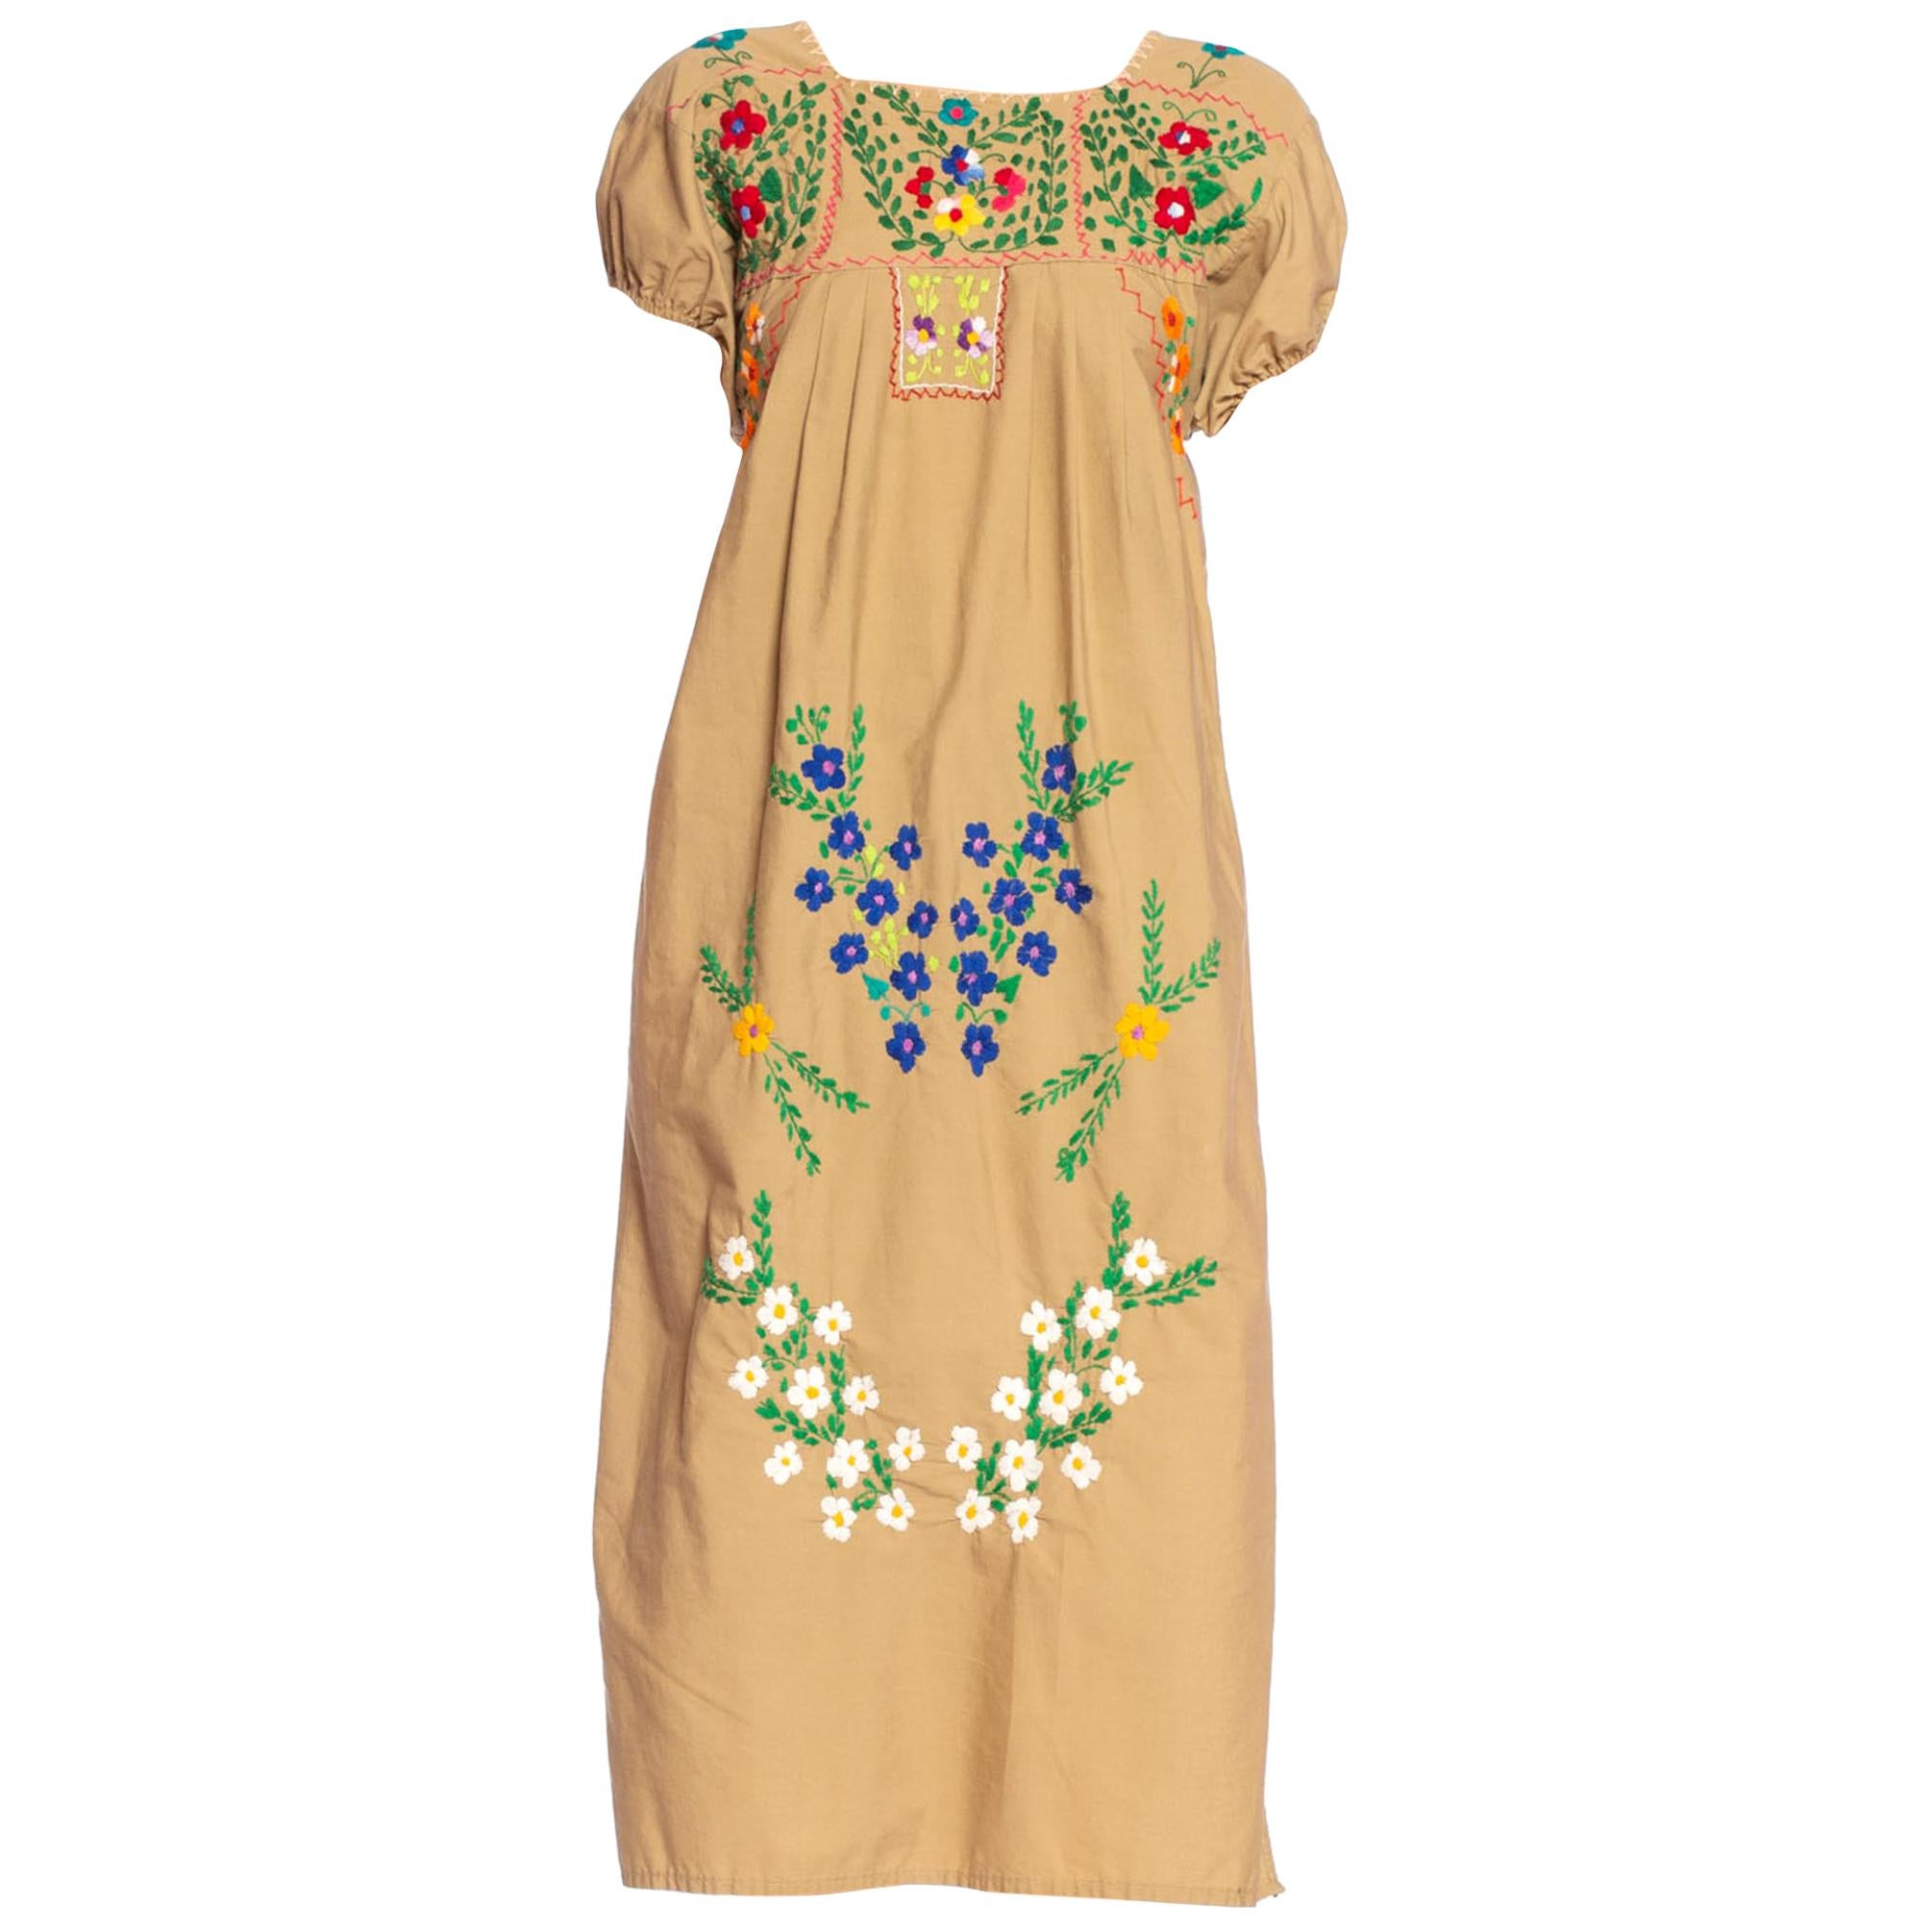 1970'S Mexican Cotton Dress Covered In Hand Embroidered Flowers